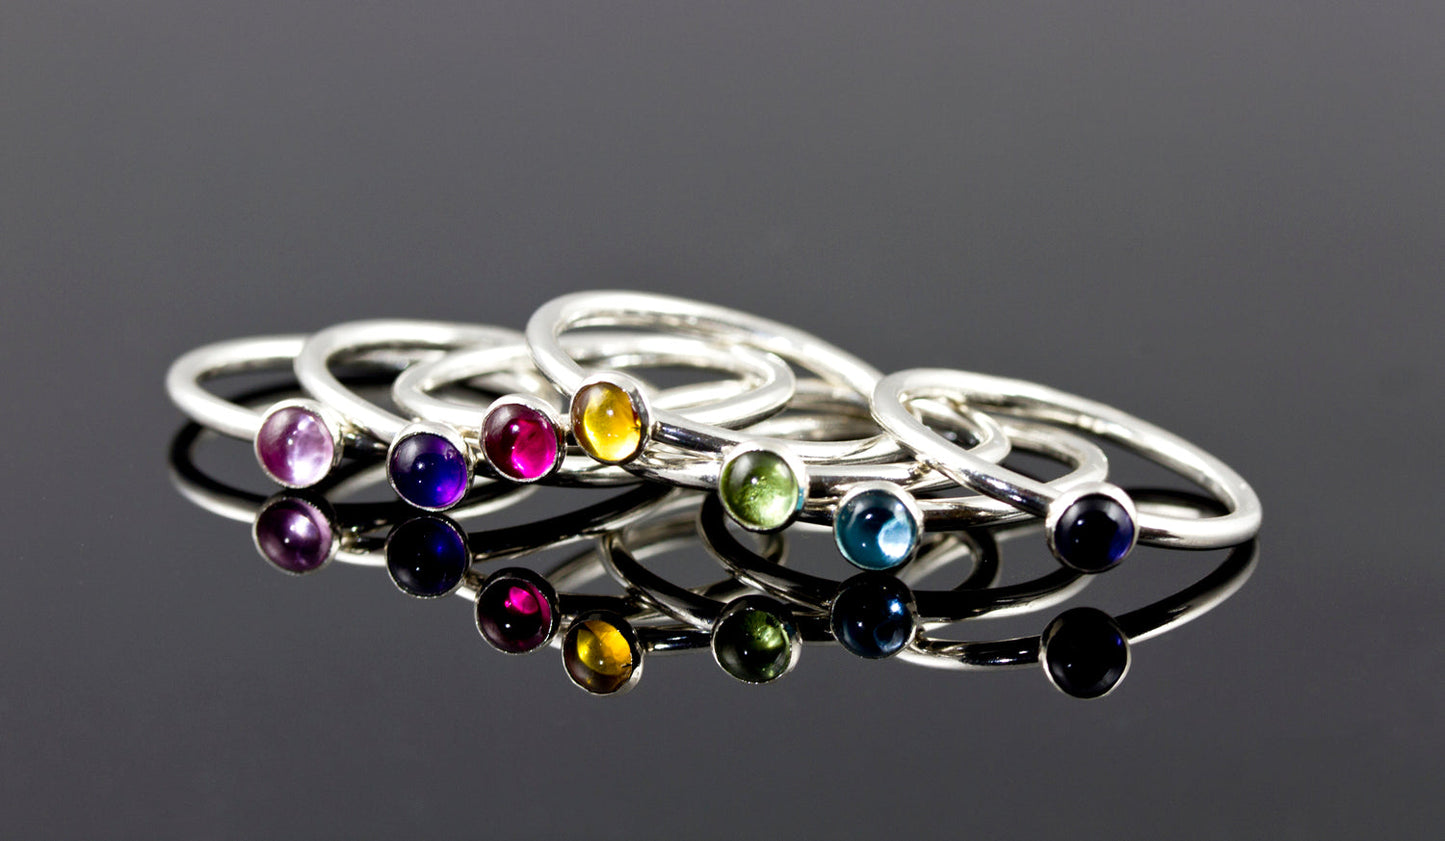 Colorful birthstone stacking rings. Sterling silver. Handmade in the US with sustainable silver.